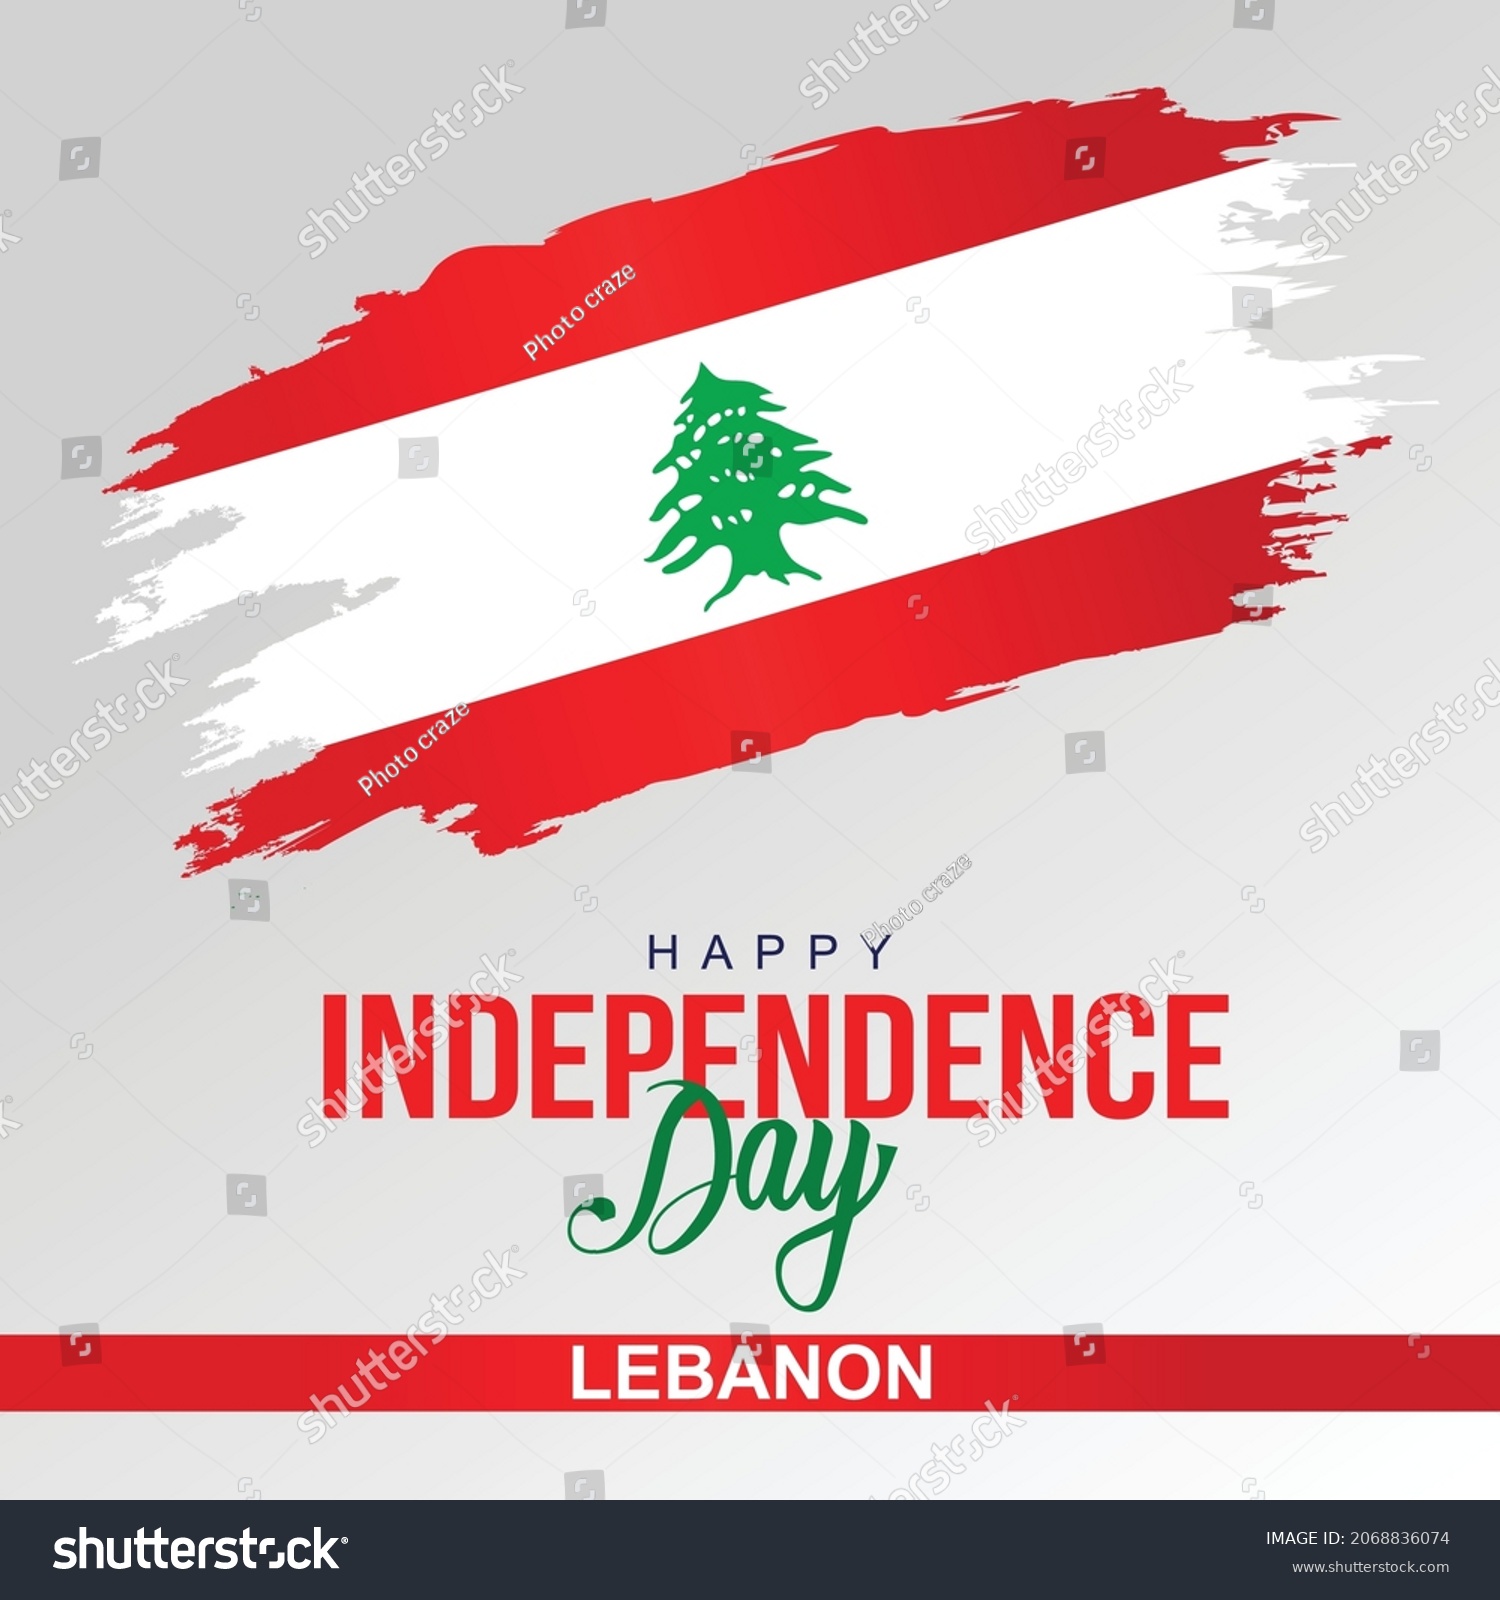 happy independence day Lebanon greetings. vector - Royalty Free Stock ...